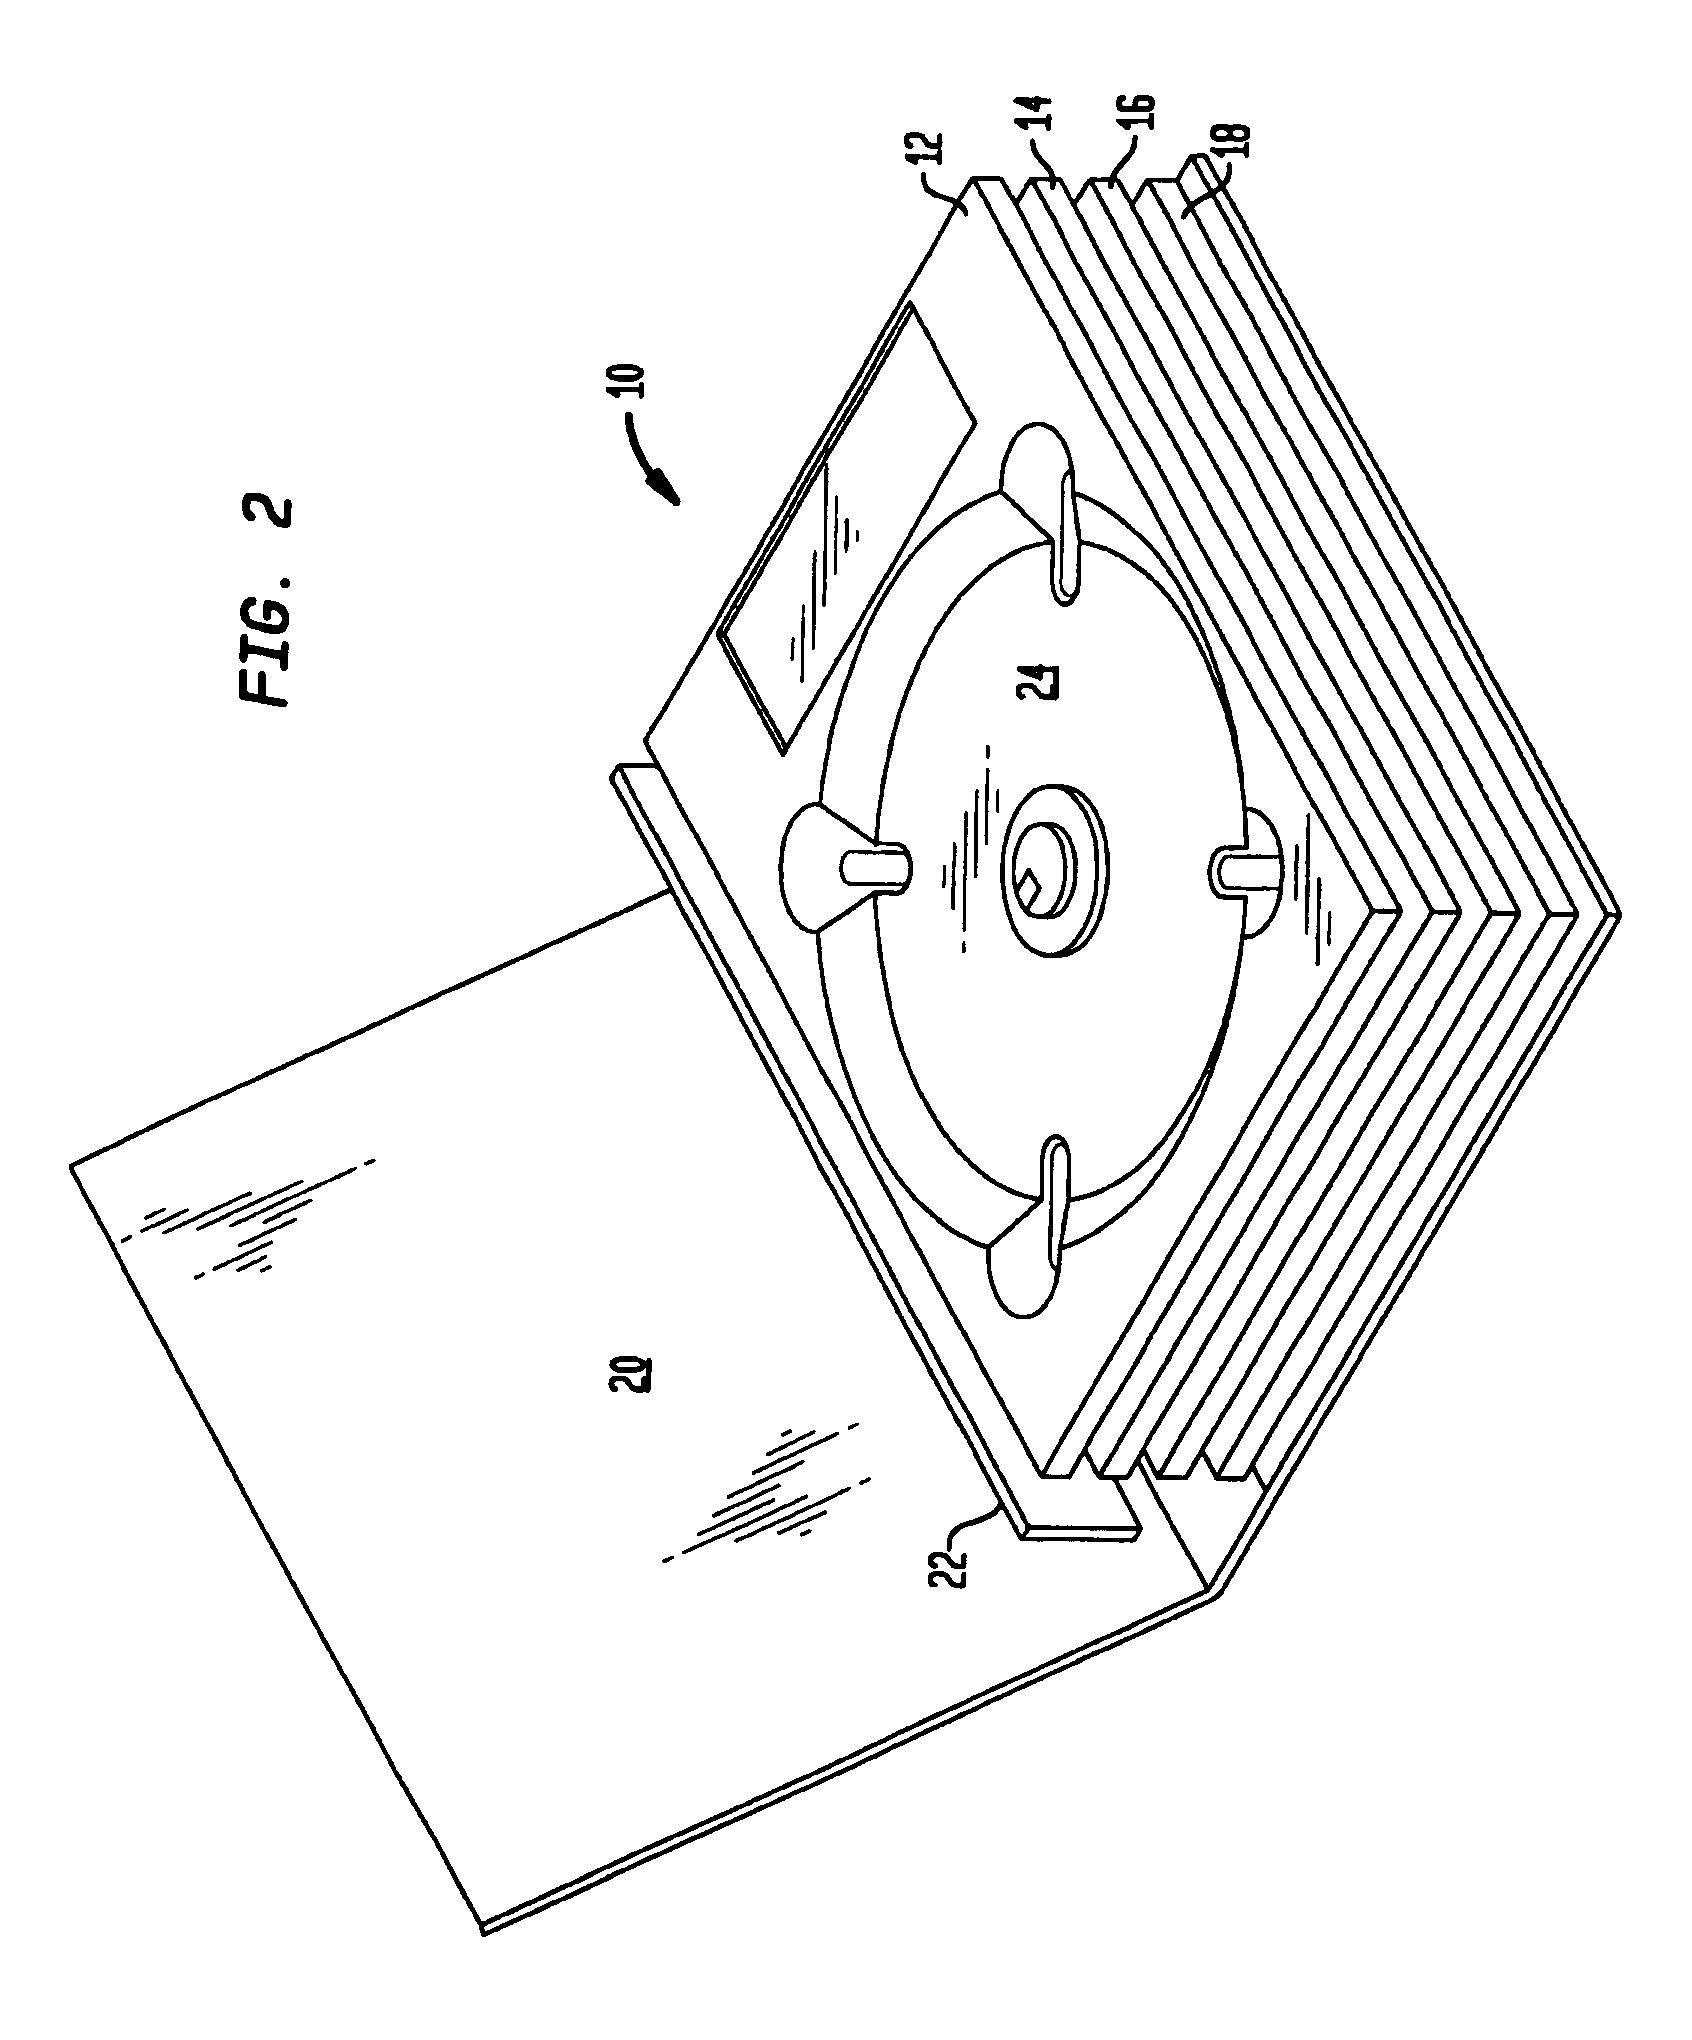 Packaging for multiple media discs and methods for making same